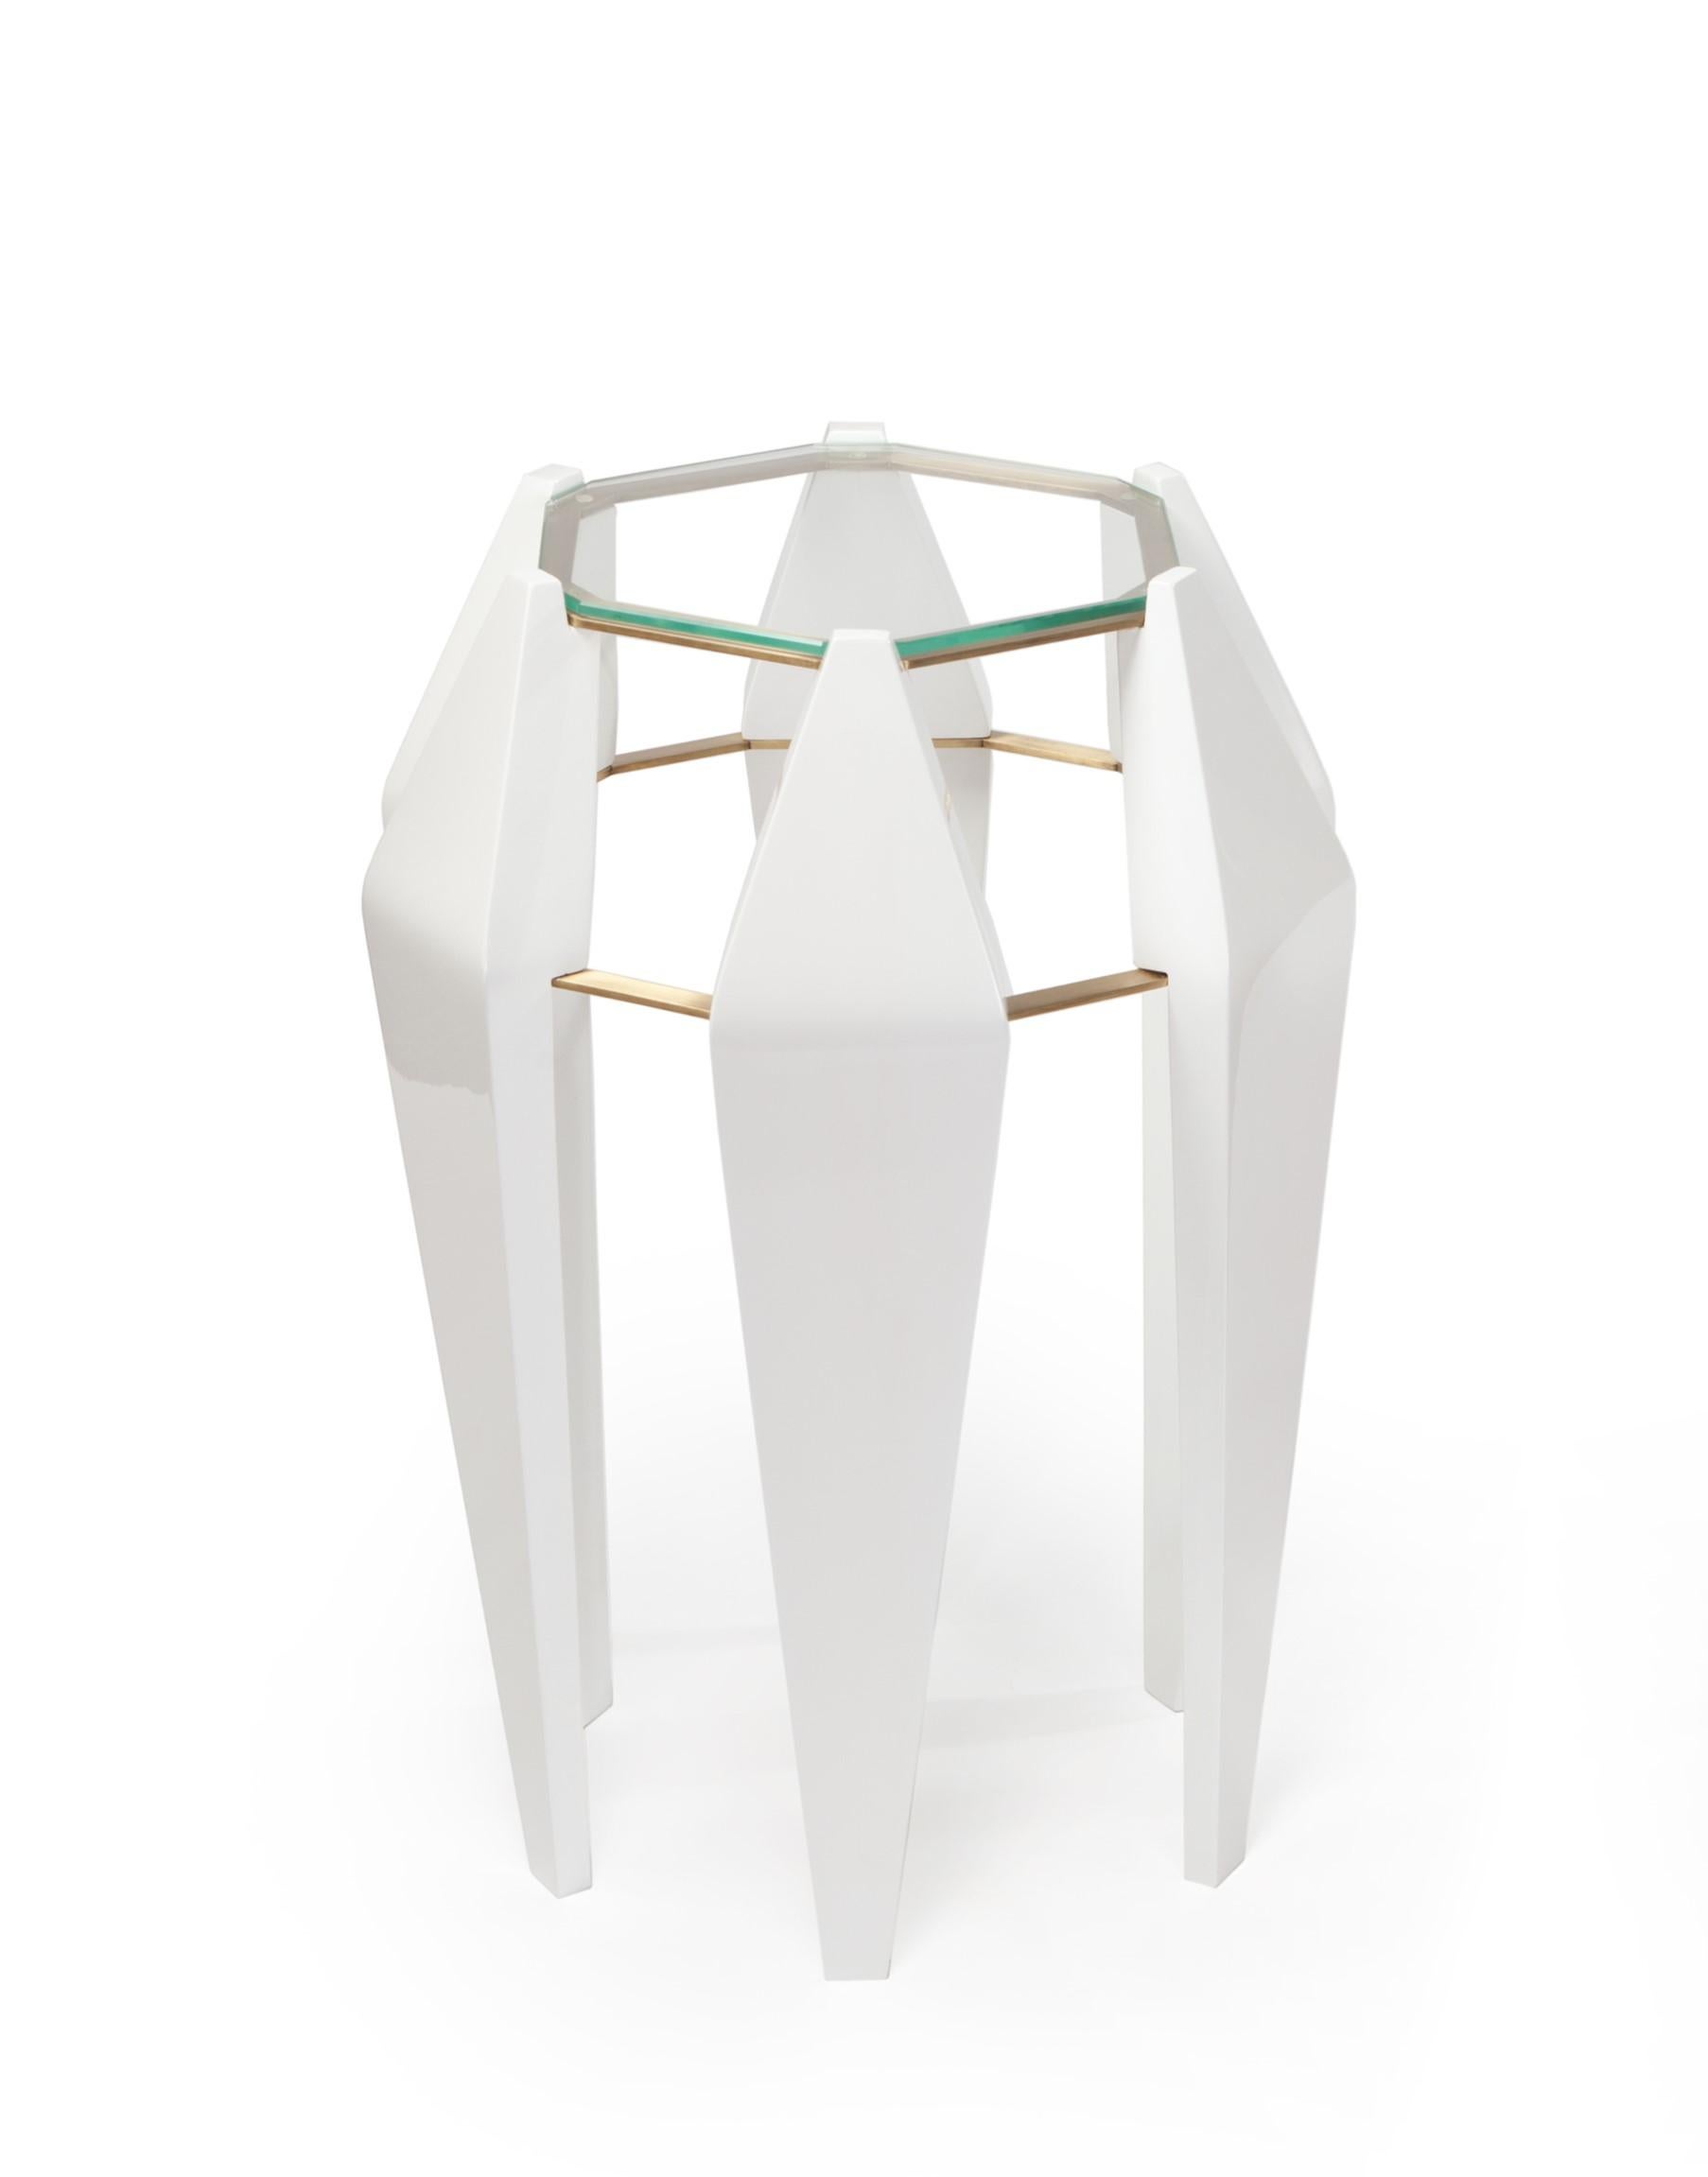 High Na Pali White Side Table by InsidherLand
Dimensions: D 42 x W 42 x H 60 cm.
Materials: wood structure finished in white lacquered, oxidized brushed brass, glass.
5 kg.
Also available in walnut.

Numerous sculpted needles extend across the